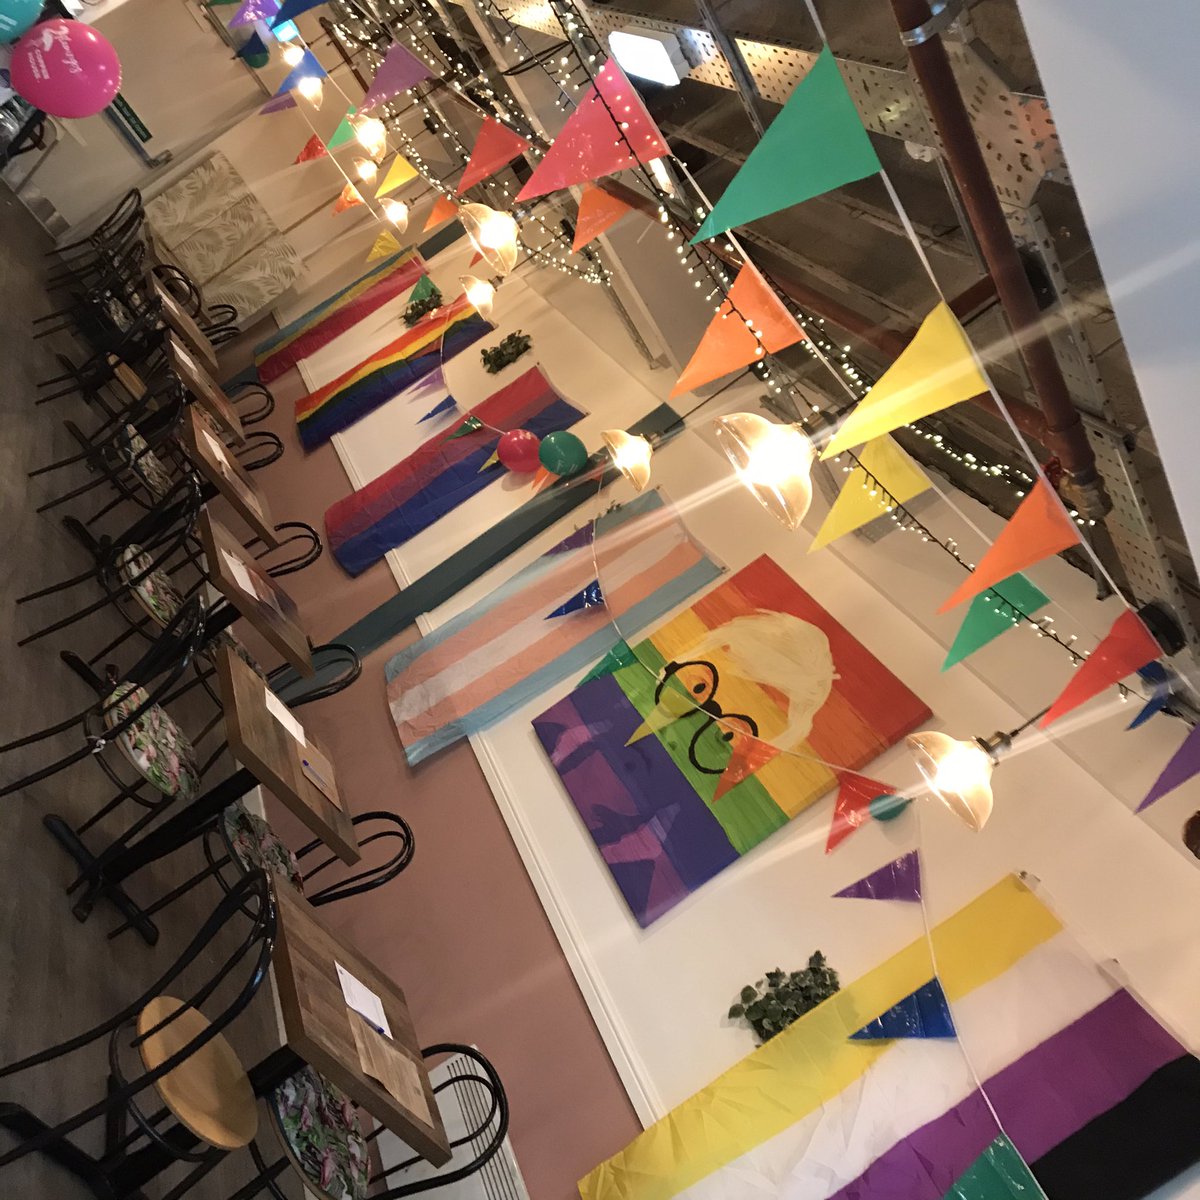 Flags and more bunting up for the Flamingos Pride Party today! Brunch from 10am & a live DJ (@bleedingobvs hosting ) from 3-7pm! Lots of rainbow cake on standby too 🌈😉Can’t wait to see you all! #lgbtleeds #queerleeds #leeds #leedspride #pride